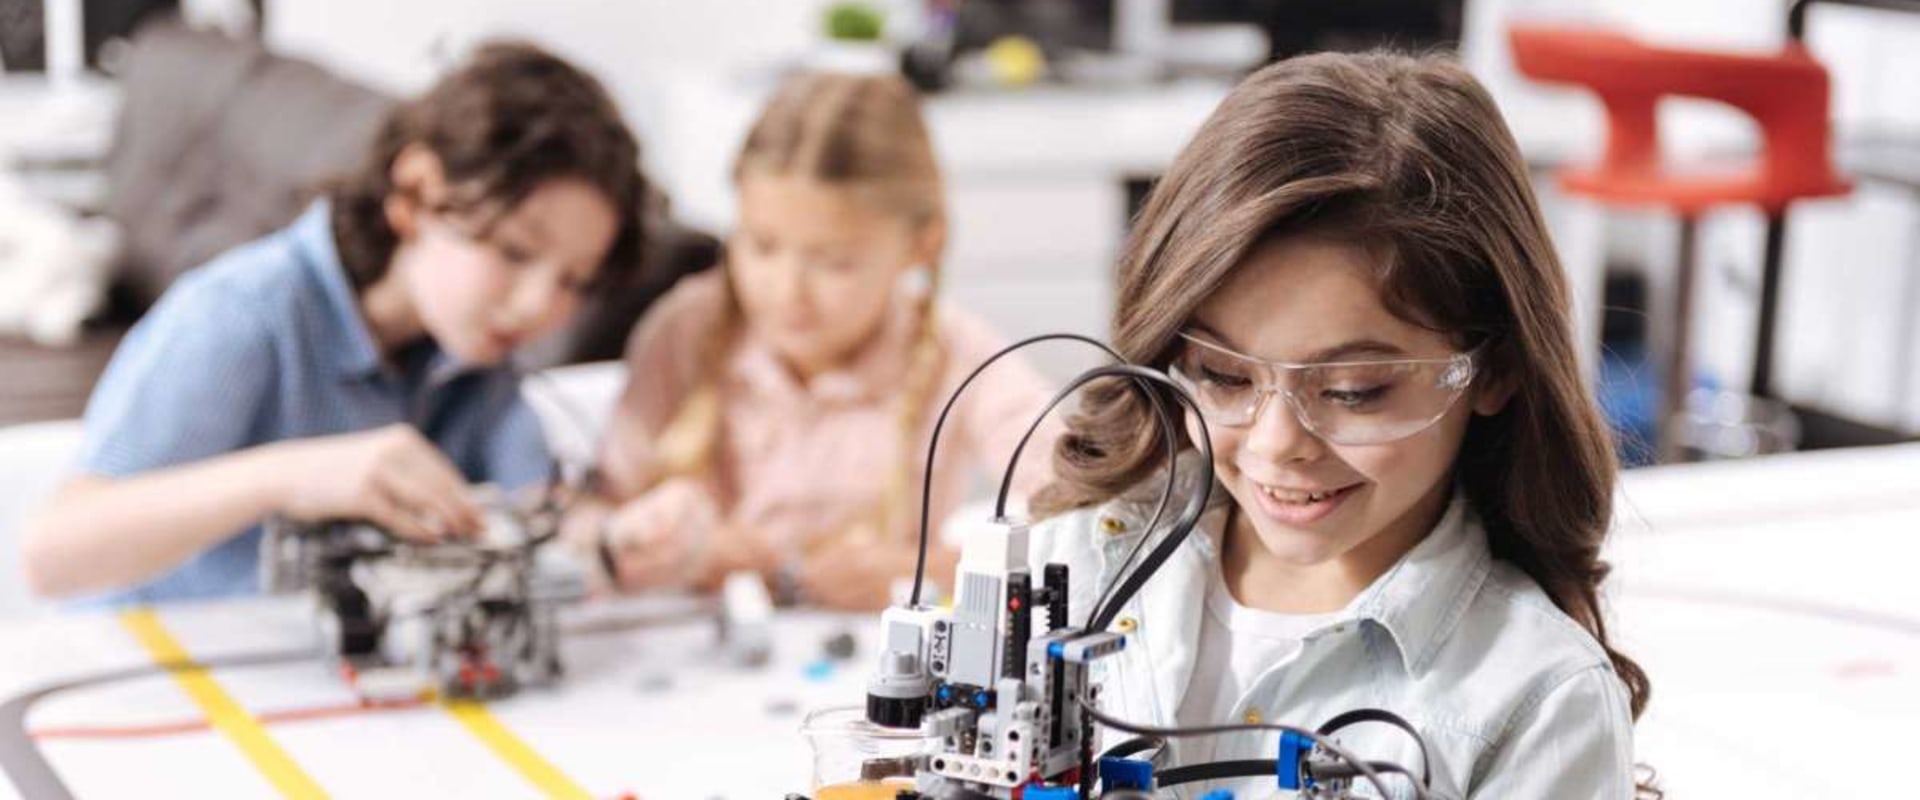 Exploring Youth Centers with STEM Activities